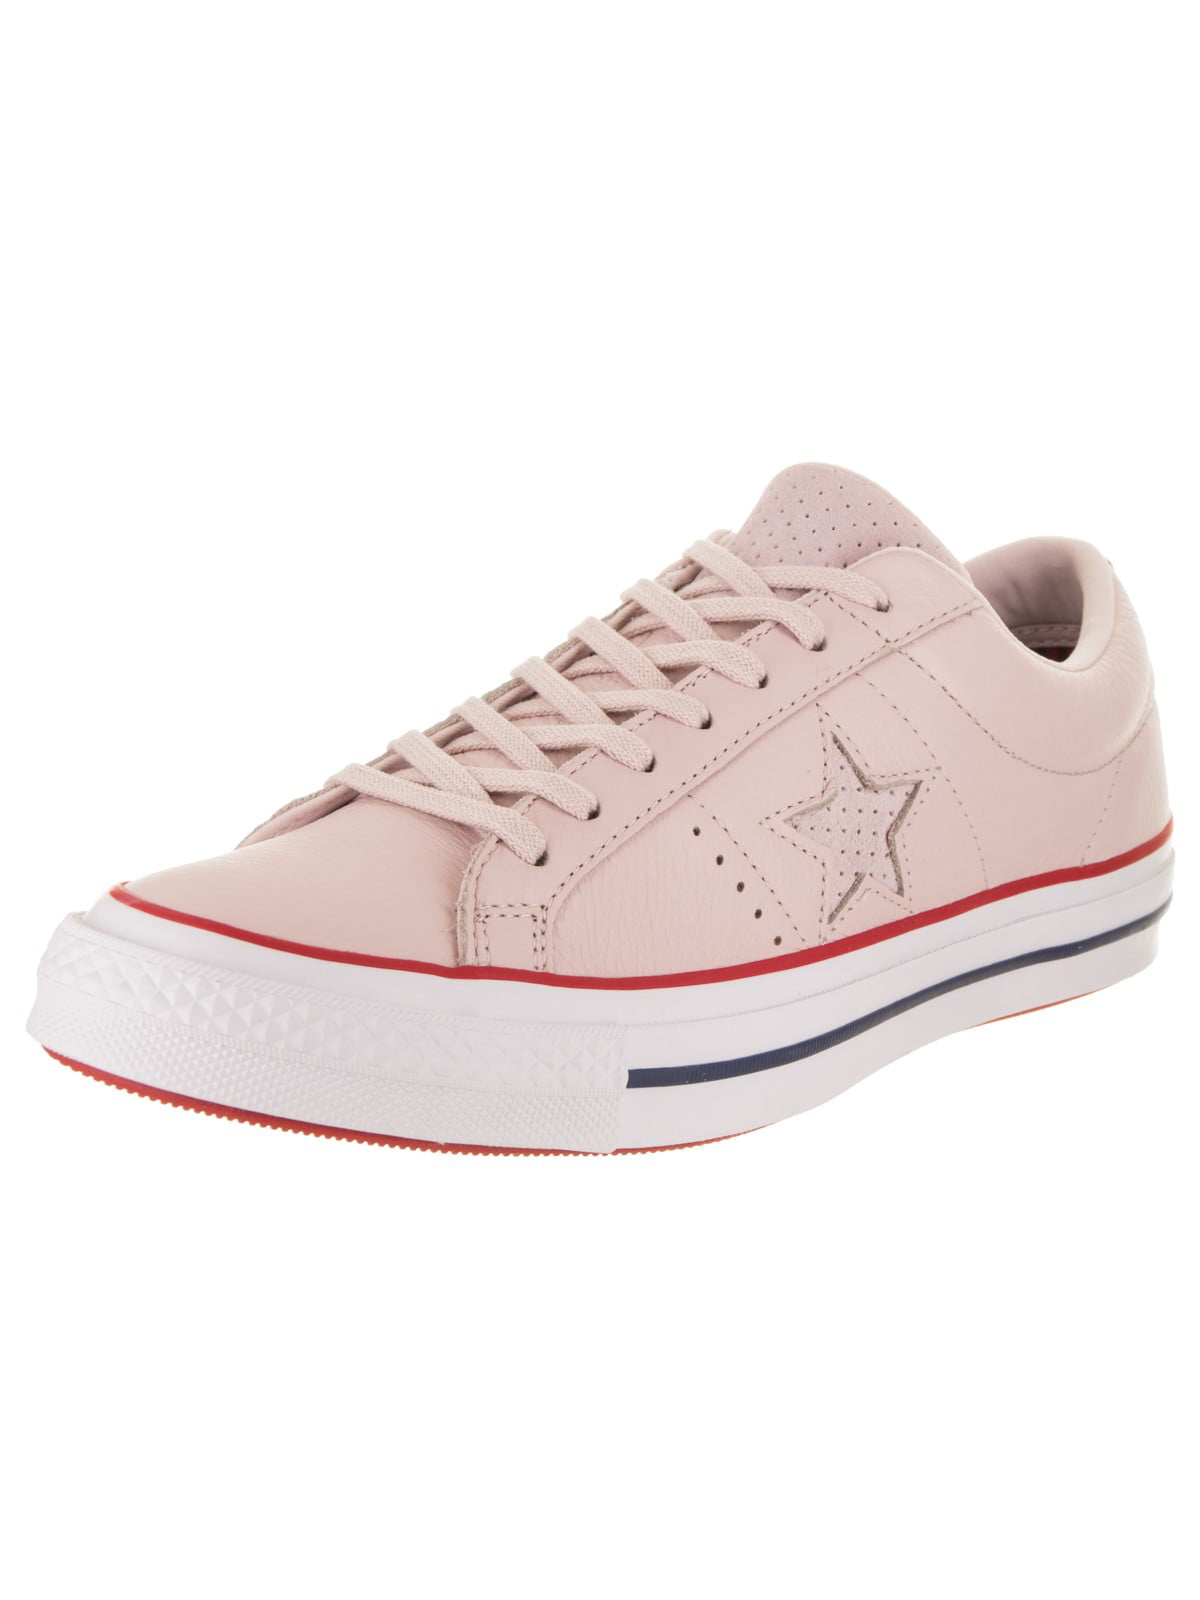 Unisex One Ox Casual Shoe -